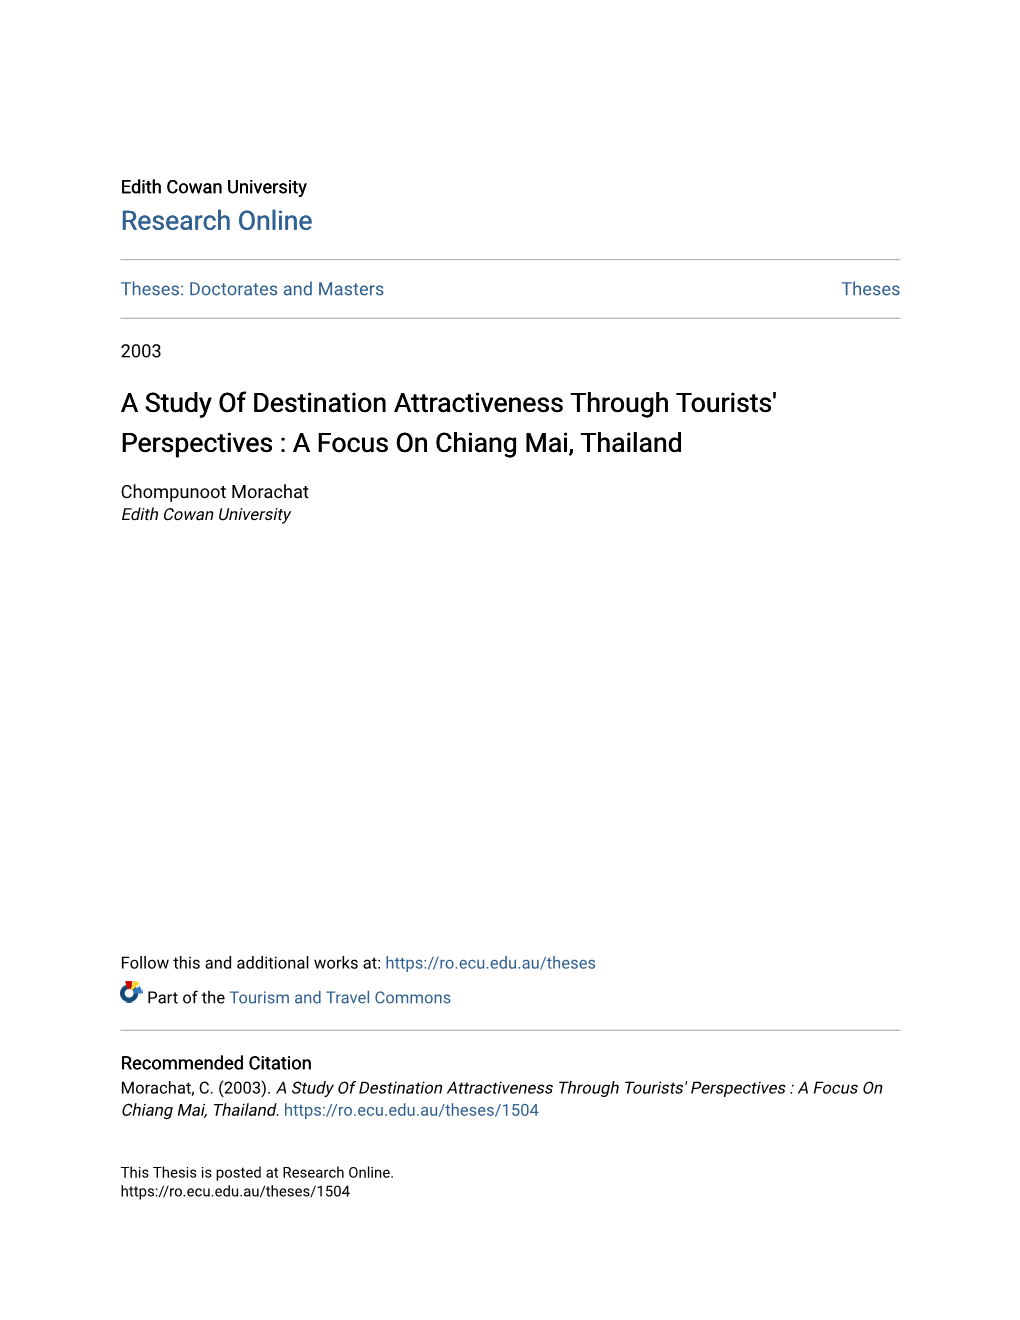 A Study of Destination Attractiveness Through Tourists' Perspectives : a Focus on Chiang Mai, Thailand